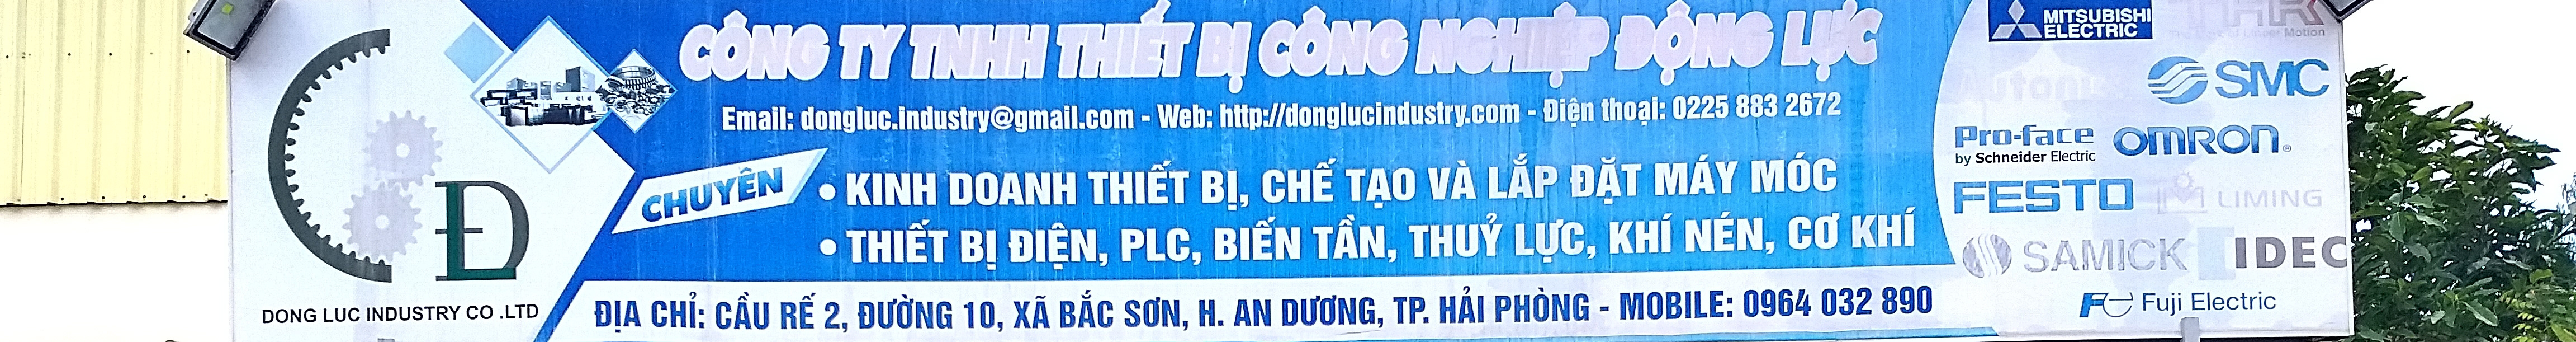 dongluc hp's profile banner